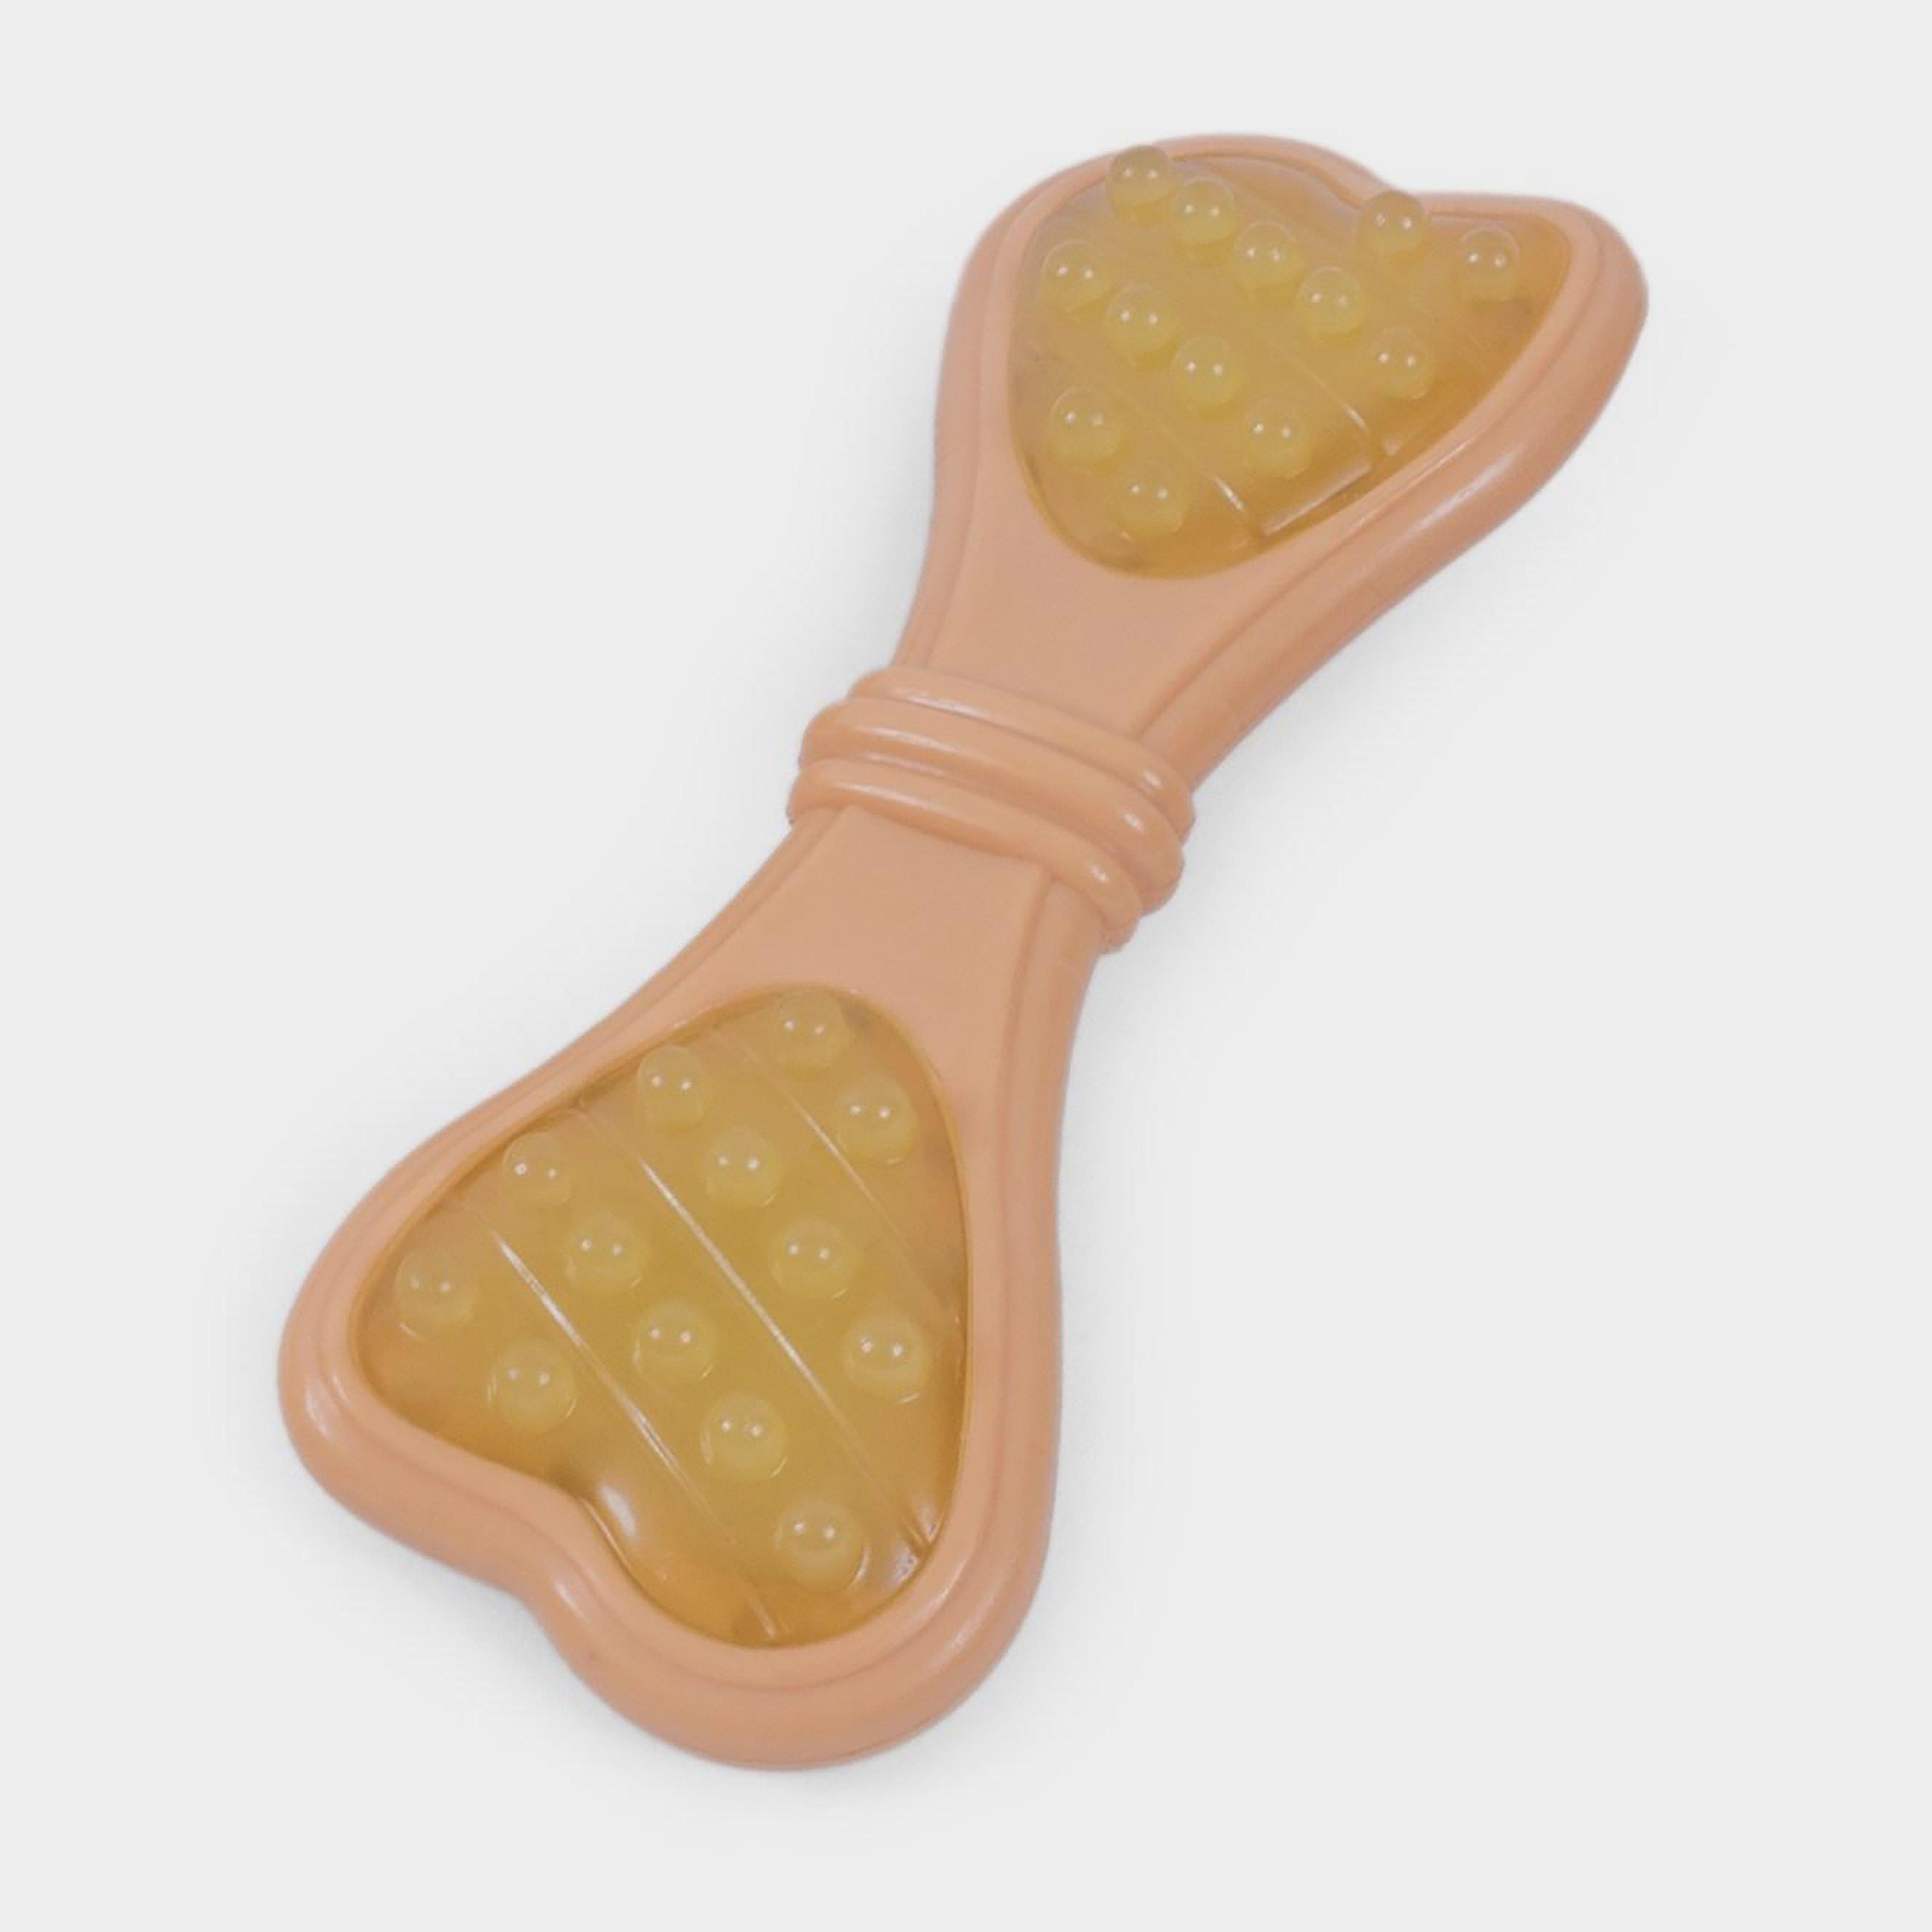 Petface Duo-Chew Peanut Butter Toy, Brown